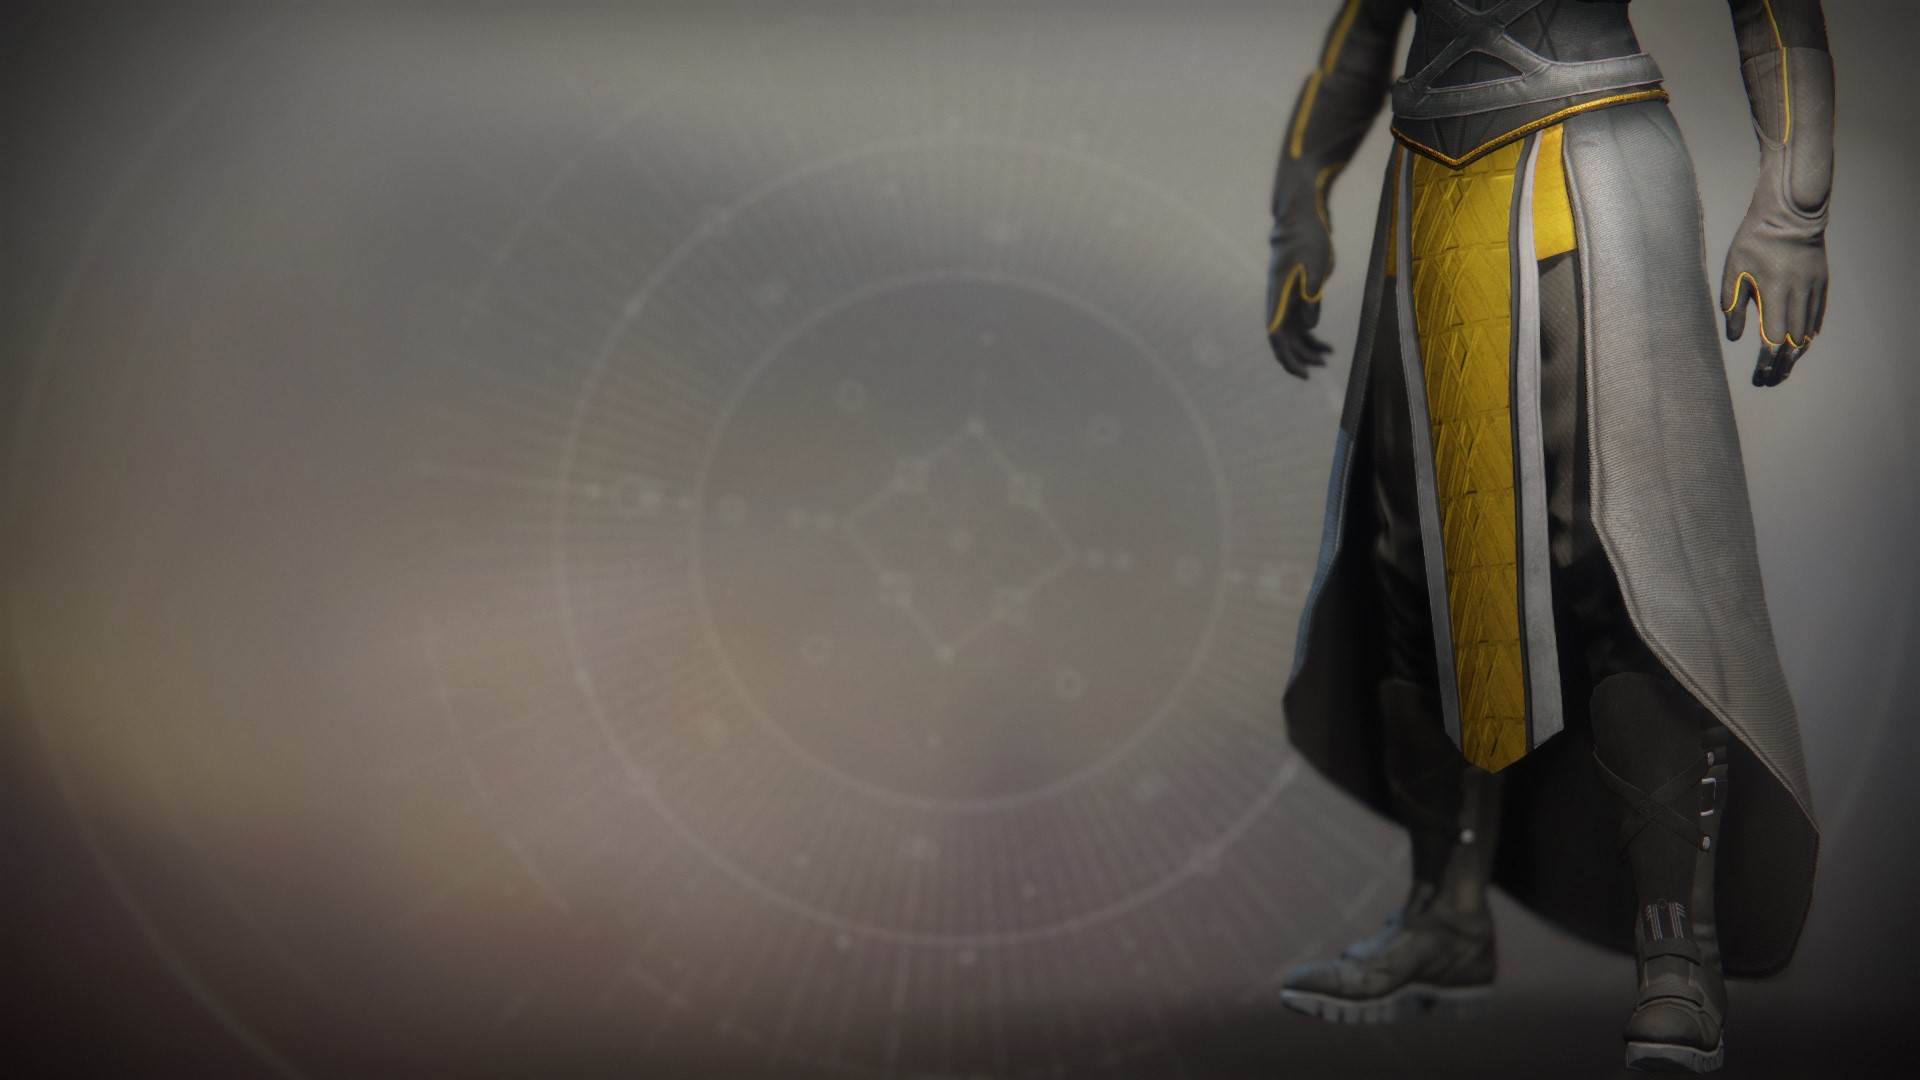 An in-game render of the Wise Warlock Boots.